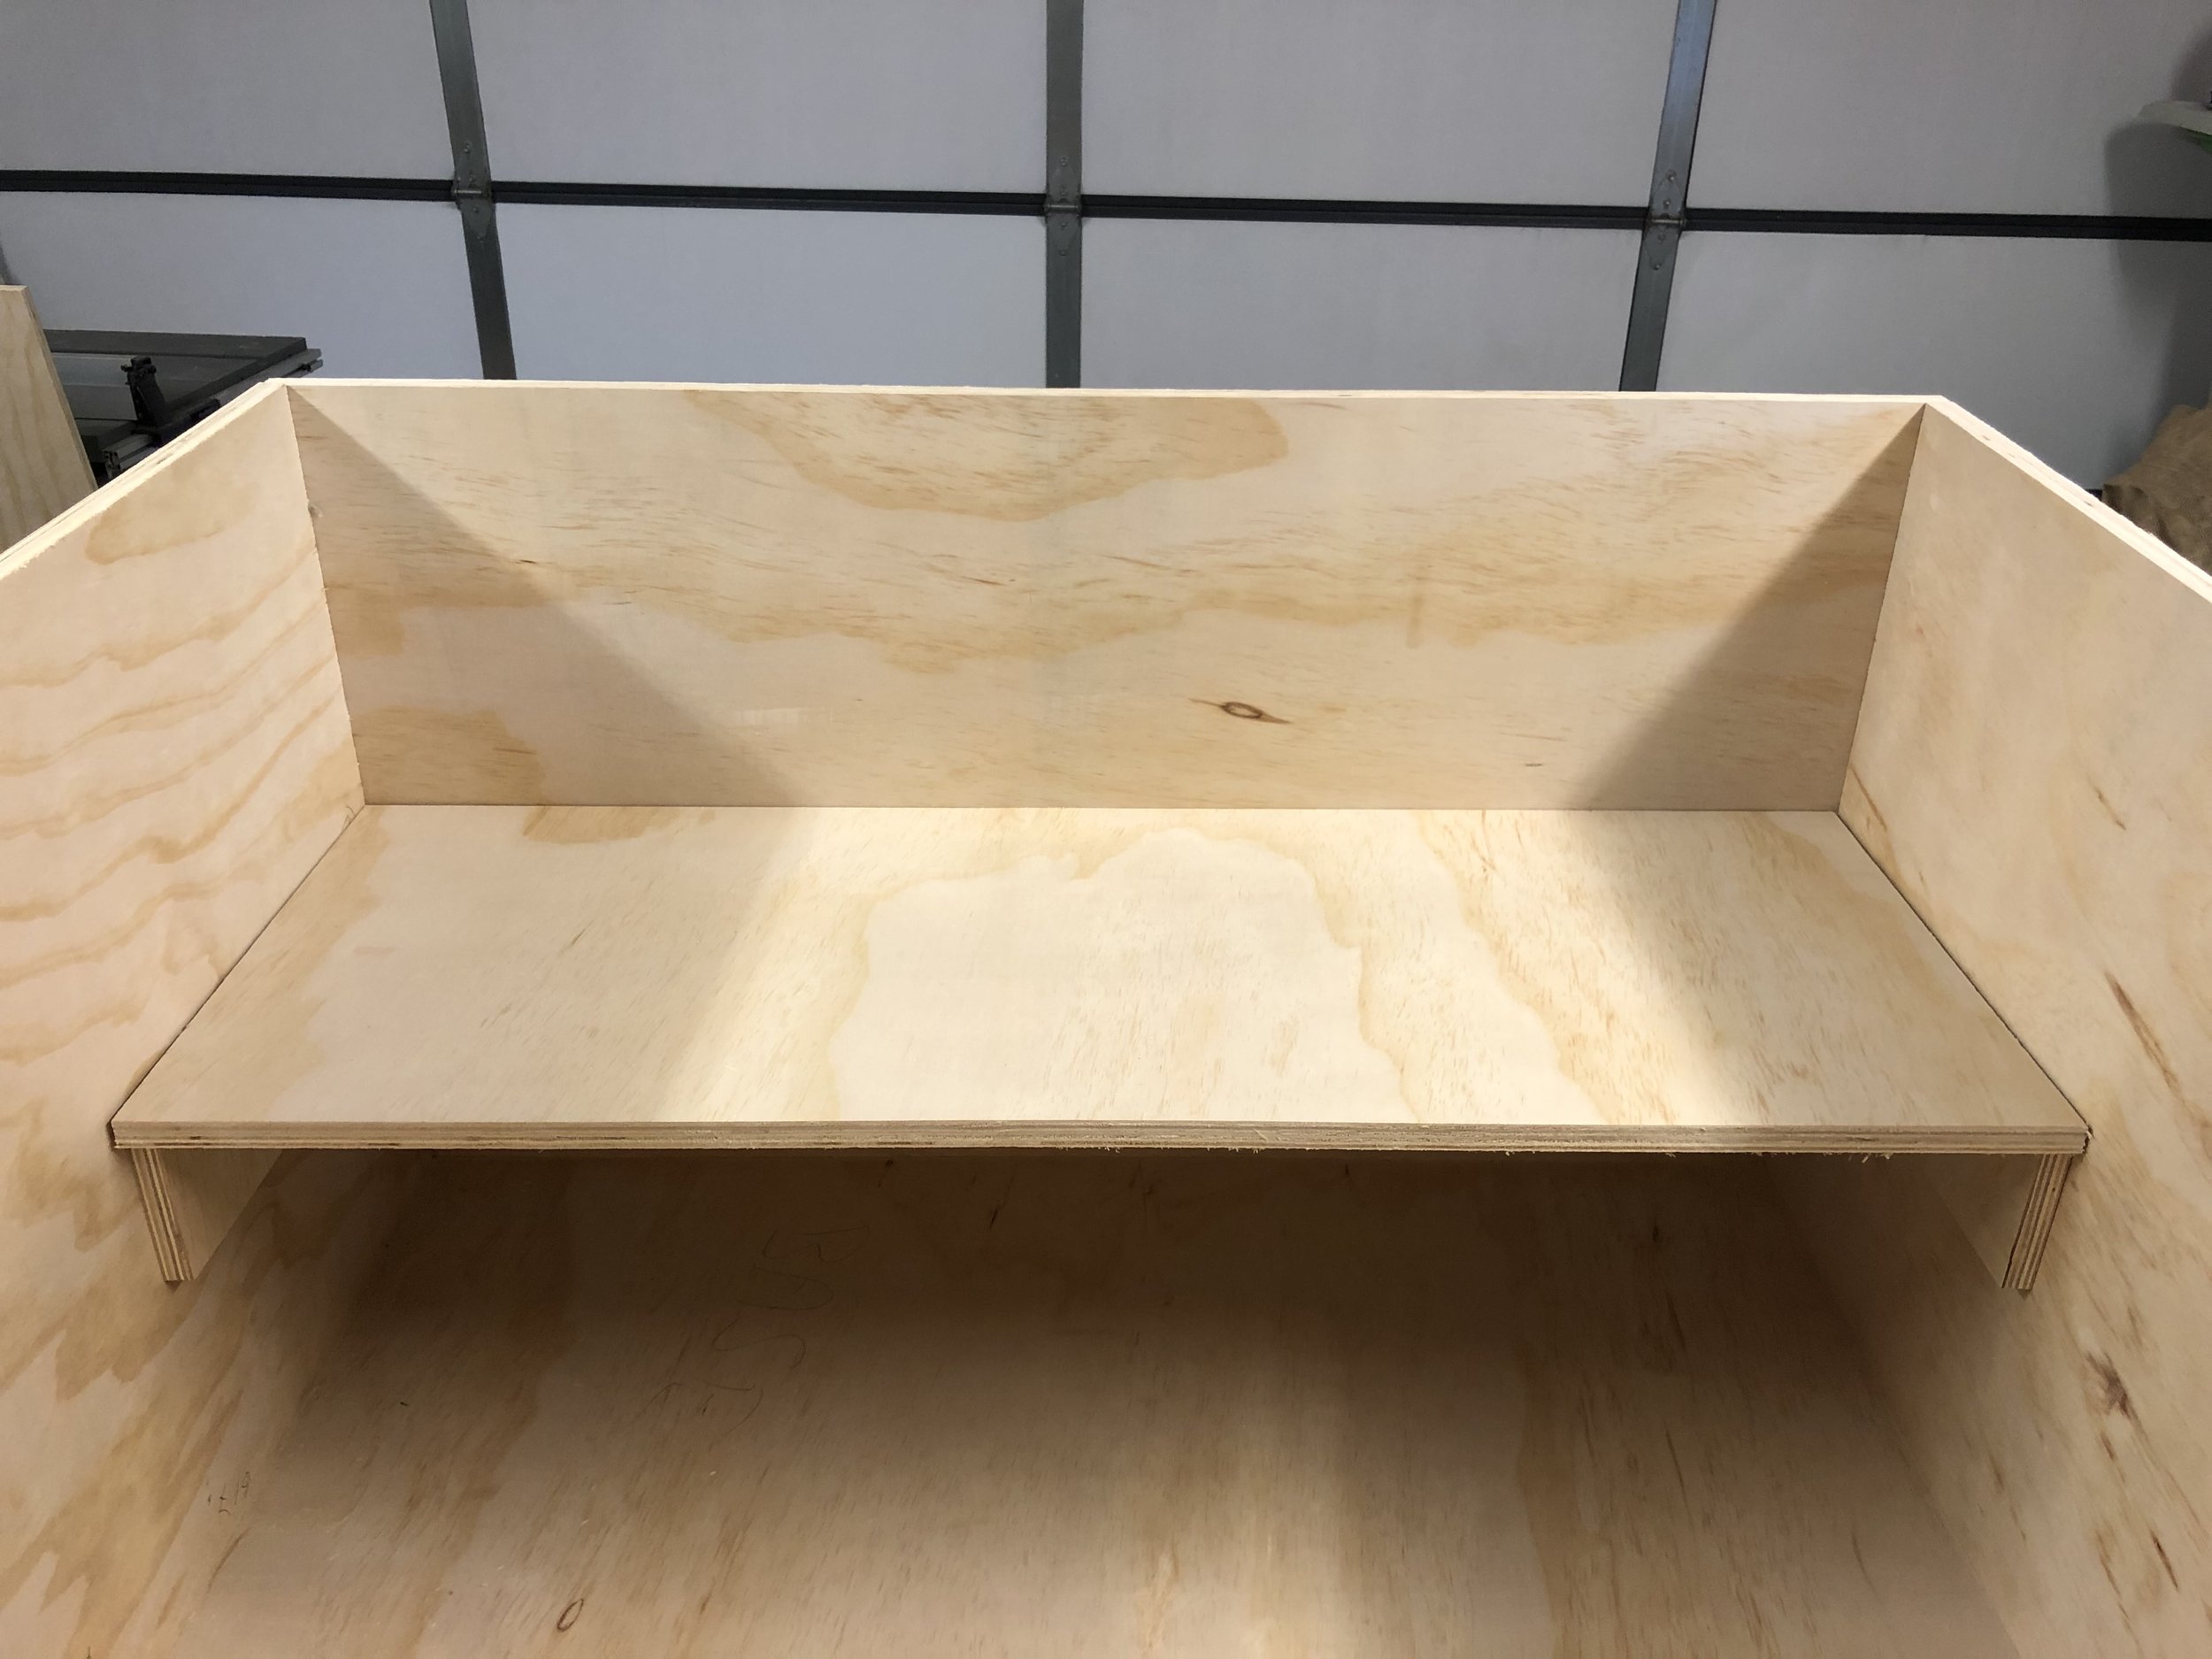 Trimmed shelf place onto its supports